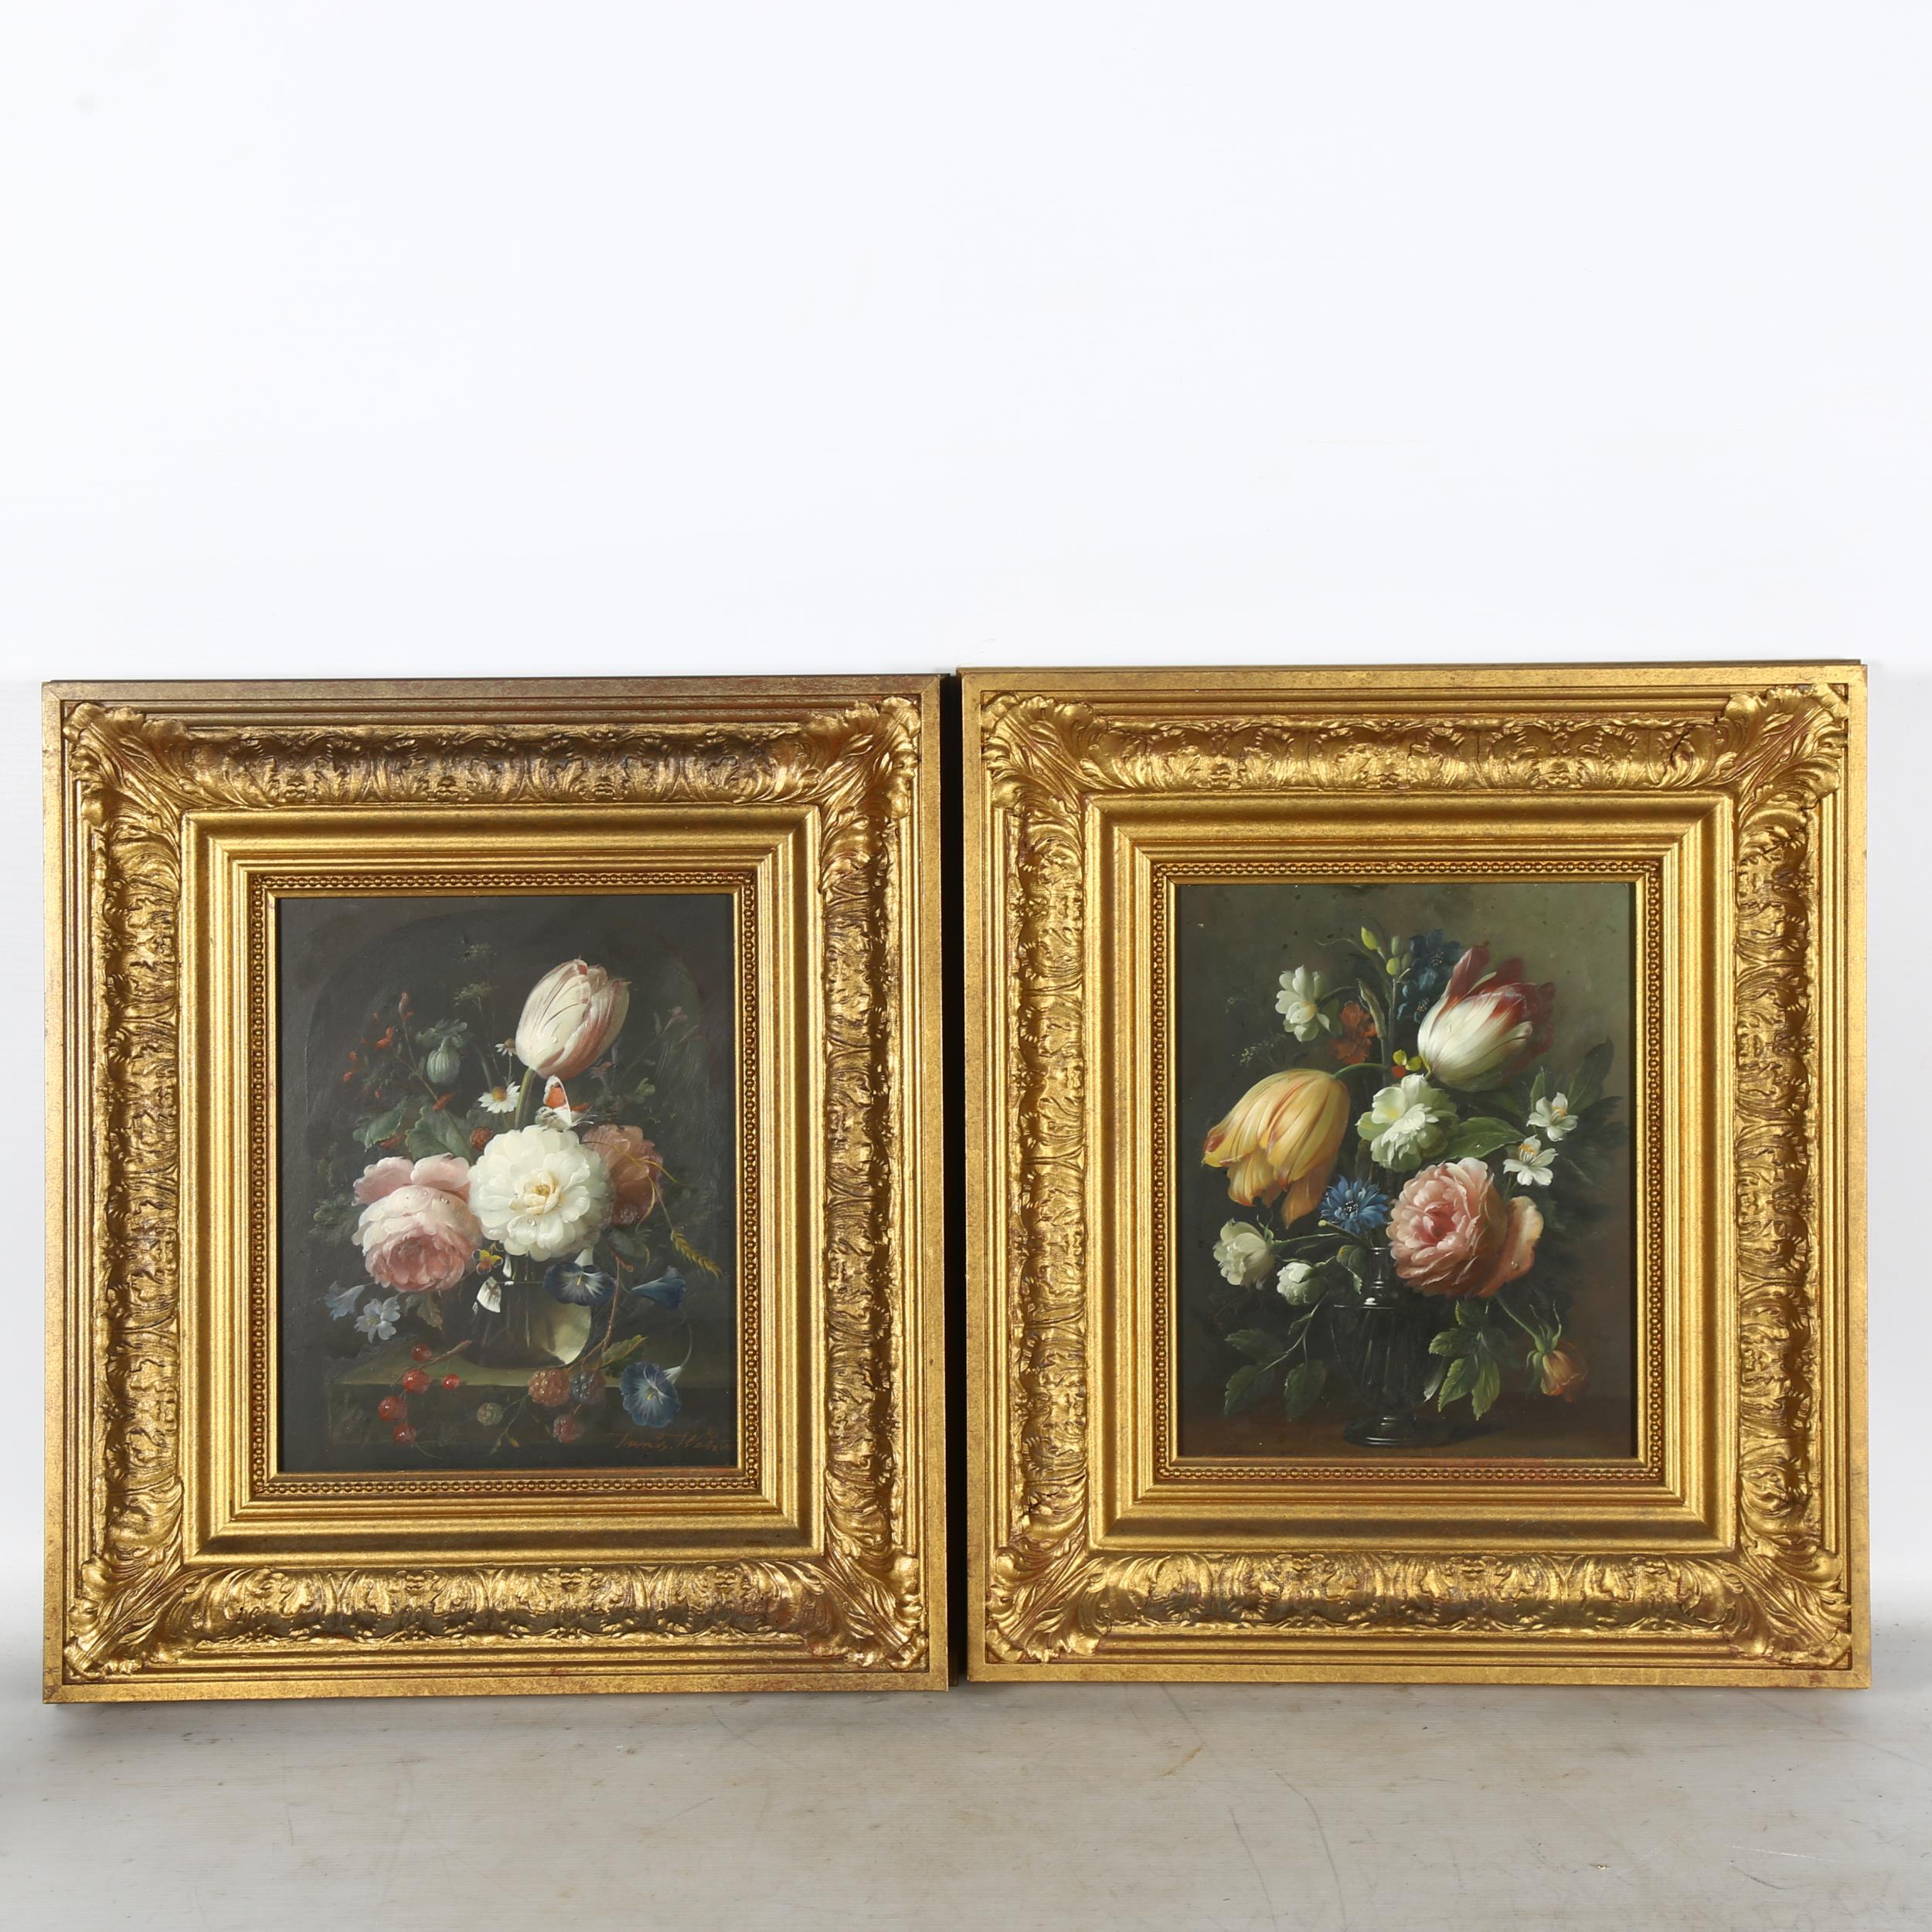 Thomas Webster, 20th century, a pair of oil on panels, still life vases of flowers, both signed,